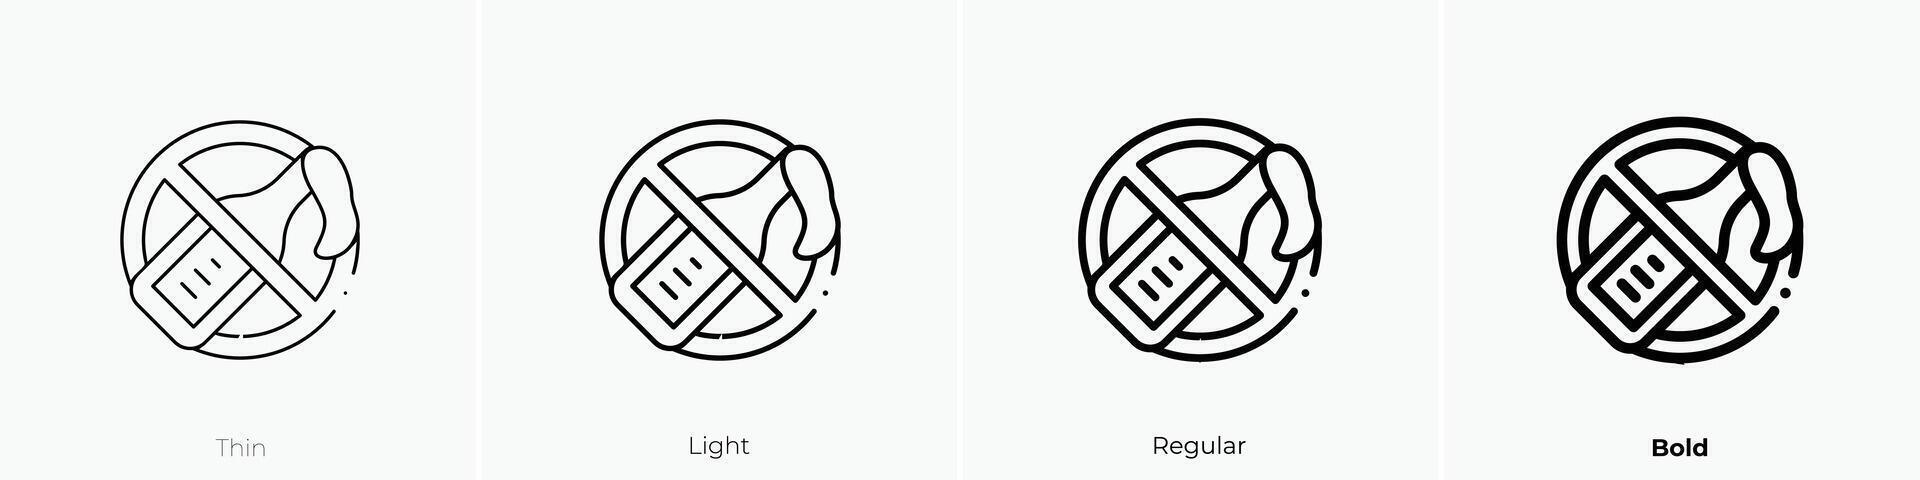 molotov icon. Thin, Light, Regular And Bold style design isolated on white background vector